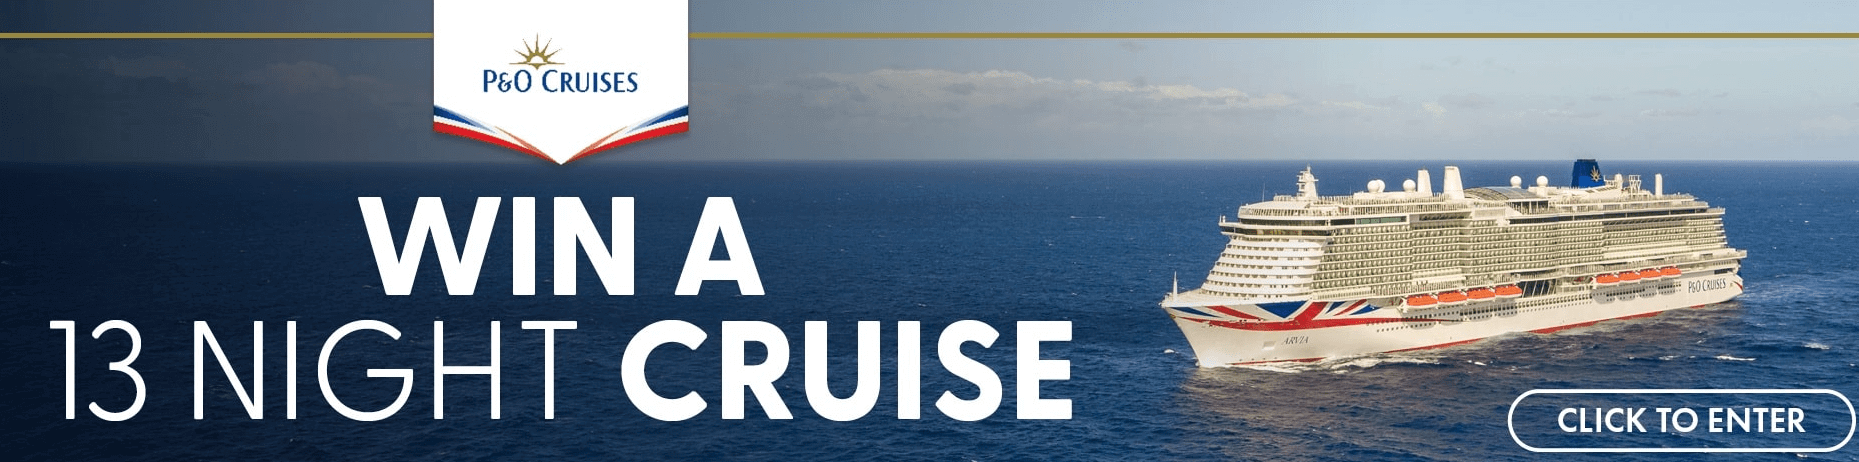 Win a Cruise on P&O Cruises Arvia with Hays Travel